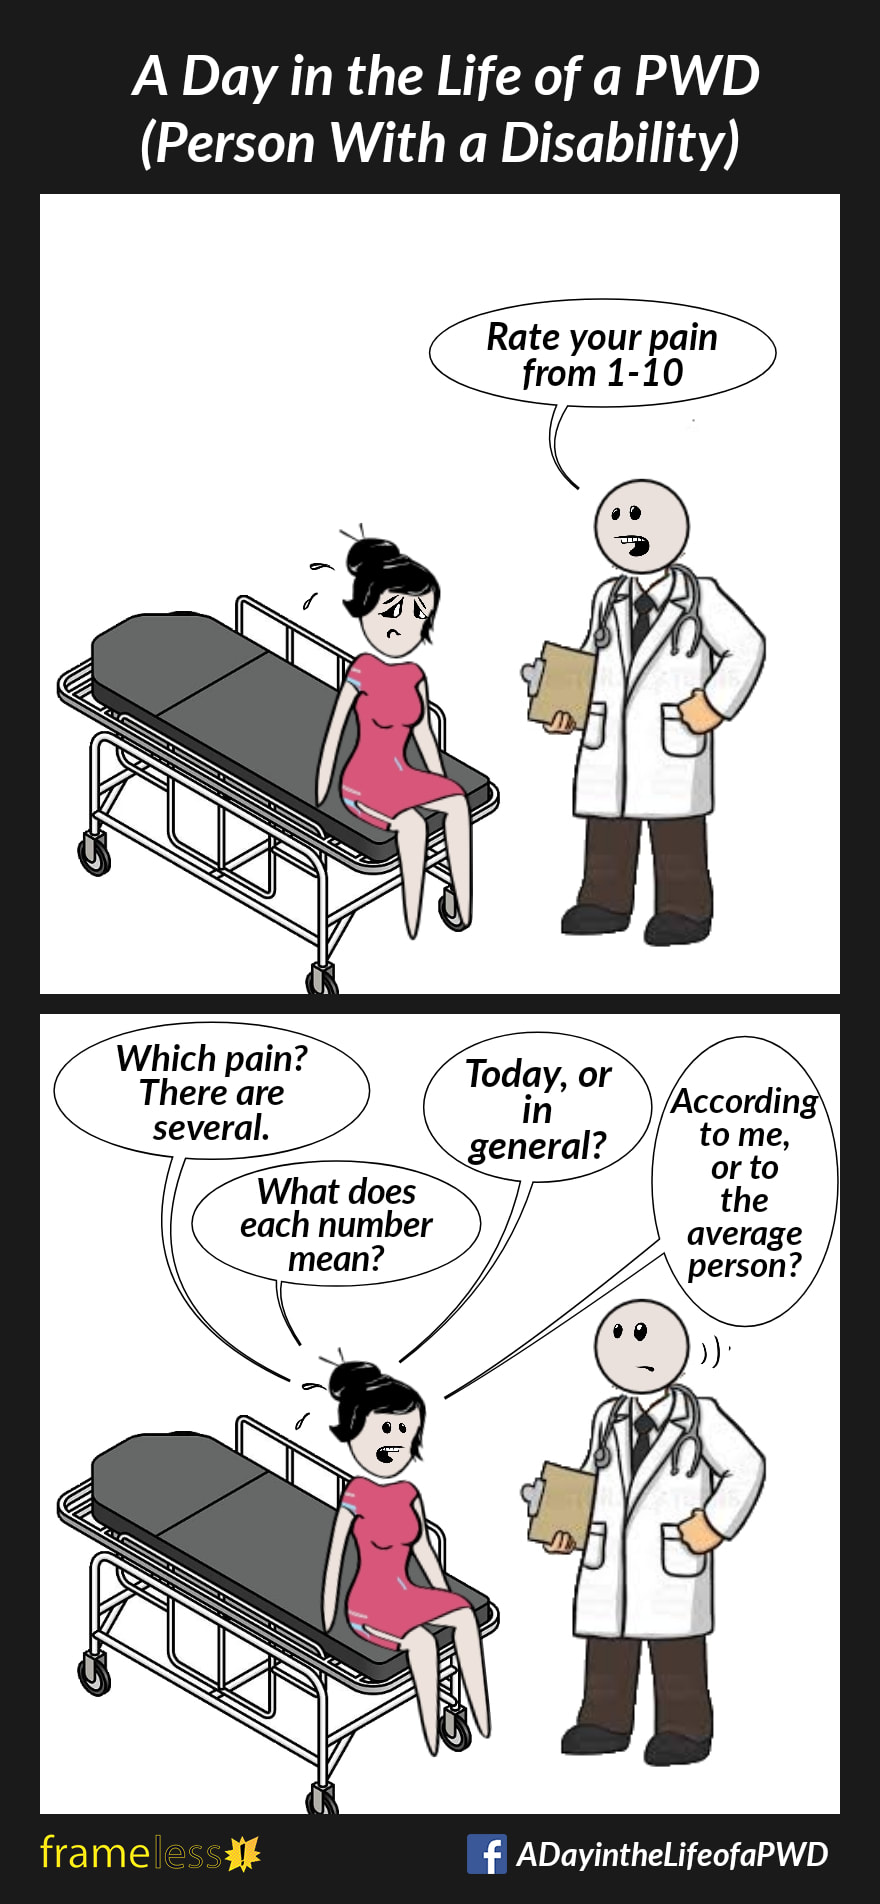 COMIC STRIP 
A Day in the Life of a PWD (Person With a Disability) 

Frame 1:
A woman in pain is sitting on an exam table in a doctor's office.
DOCTOR: Rate your pain from 1-10

Frame 2:
WOMAN: Which pain? There are several. What does each number mean? Today, or in general? According to me, or to the average person?